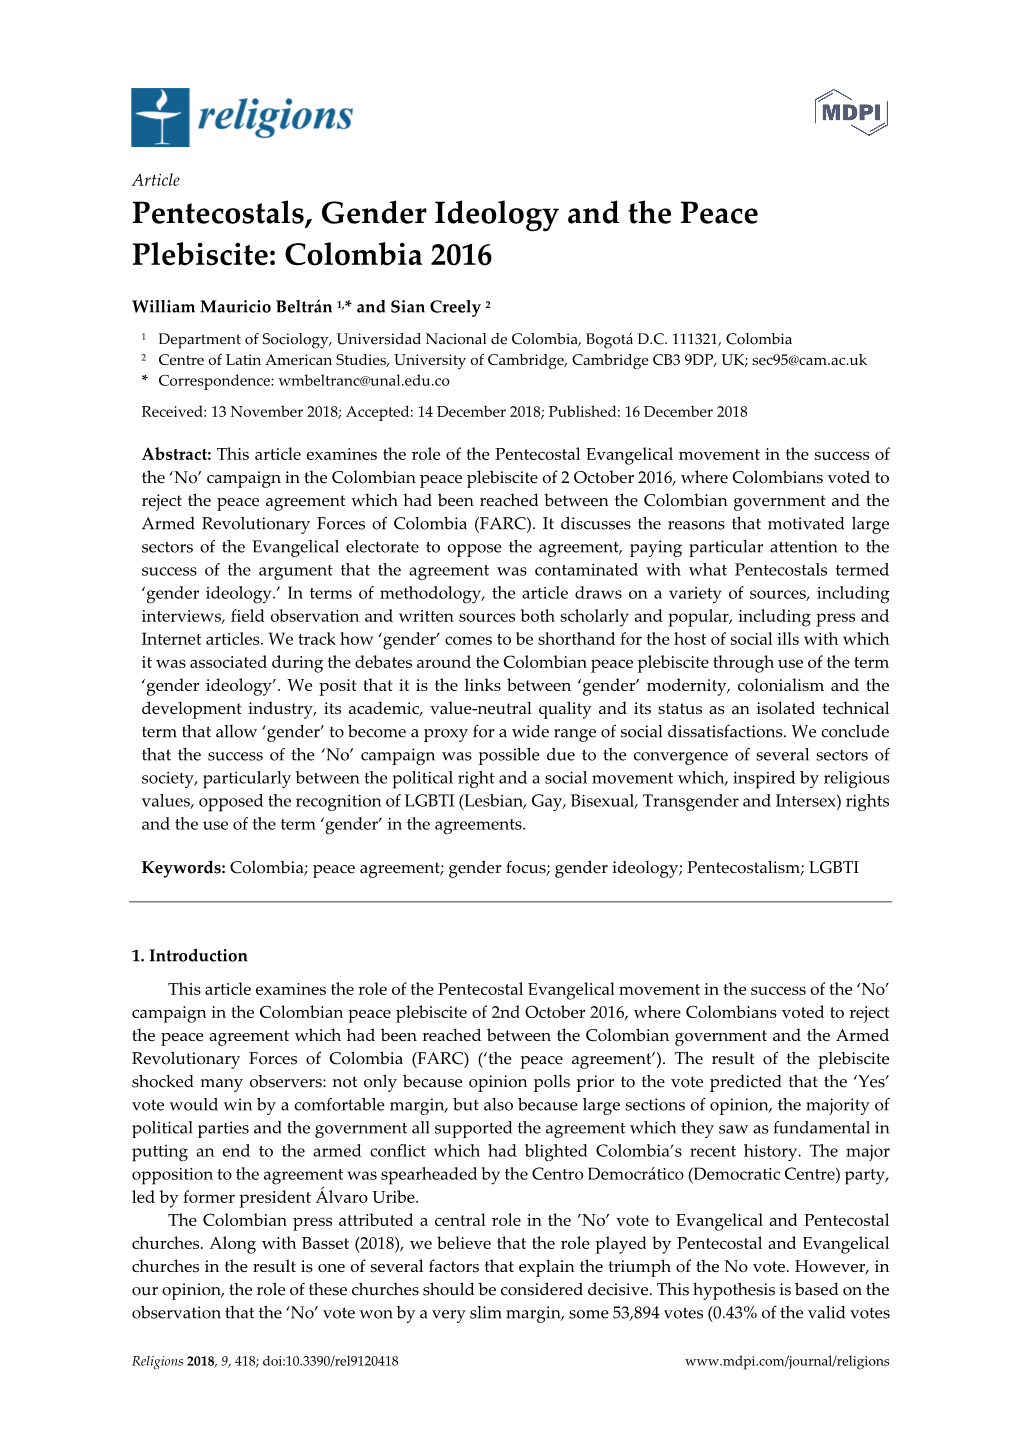 Pentecostals, Gender Ideology and the Peace Plebiscite: Colombia 2016